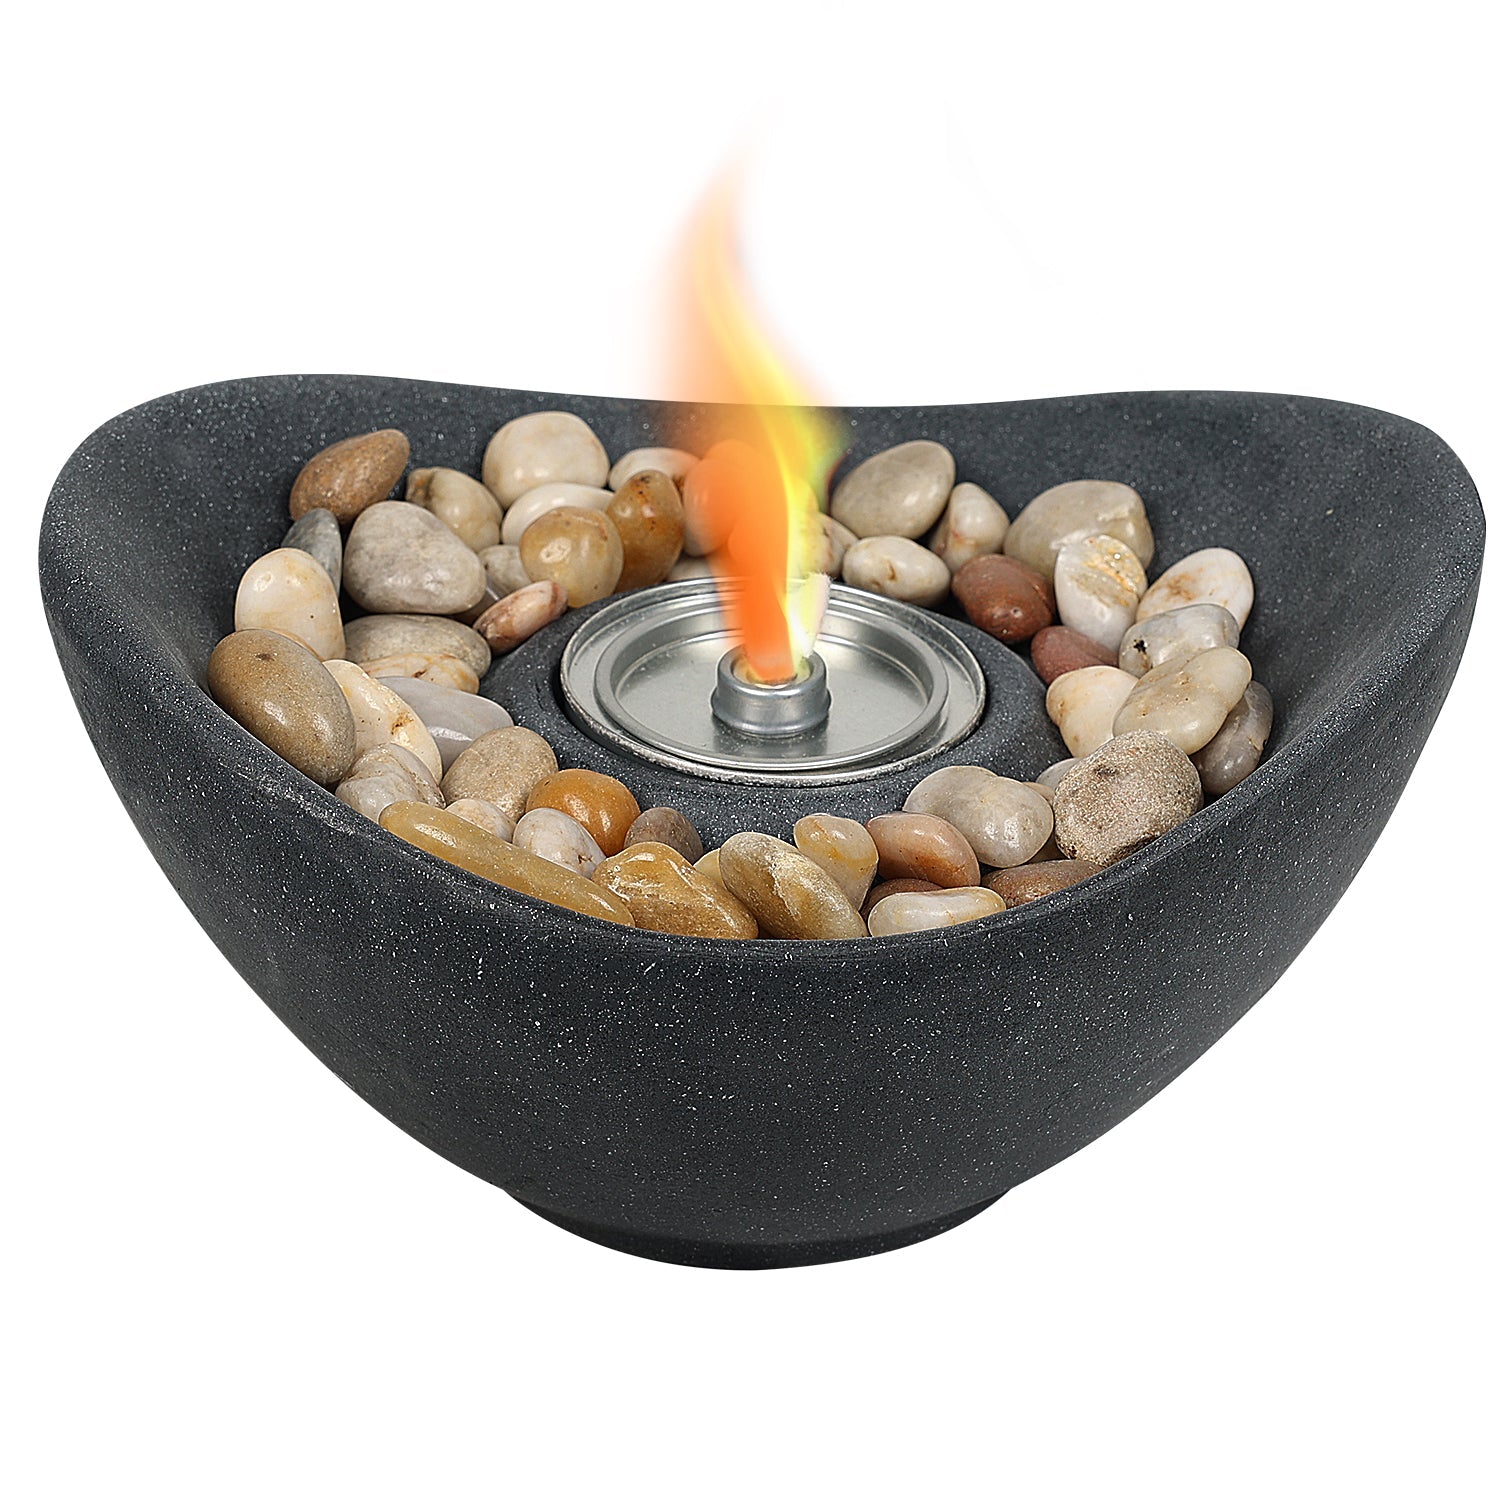 Portable Concrete Fire Pit - Indoor/Outdoor Tabletop Fireplace for Balcony, Patio Decor Tool Aoodor Graphite  